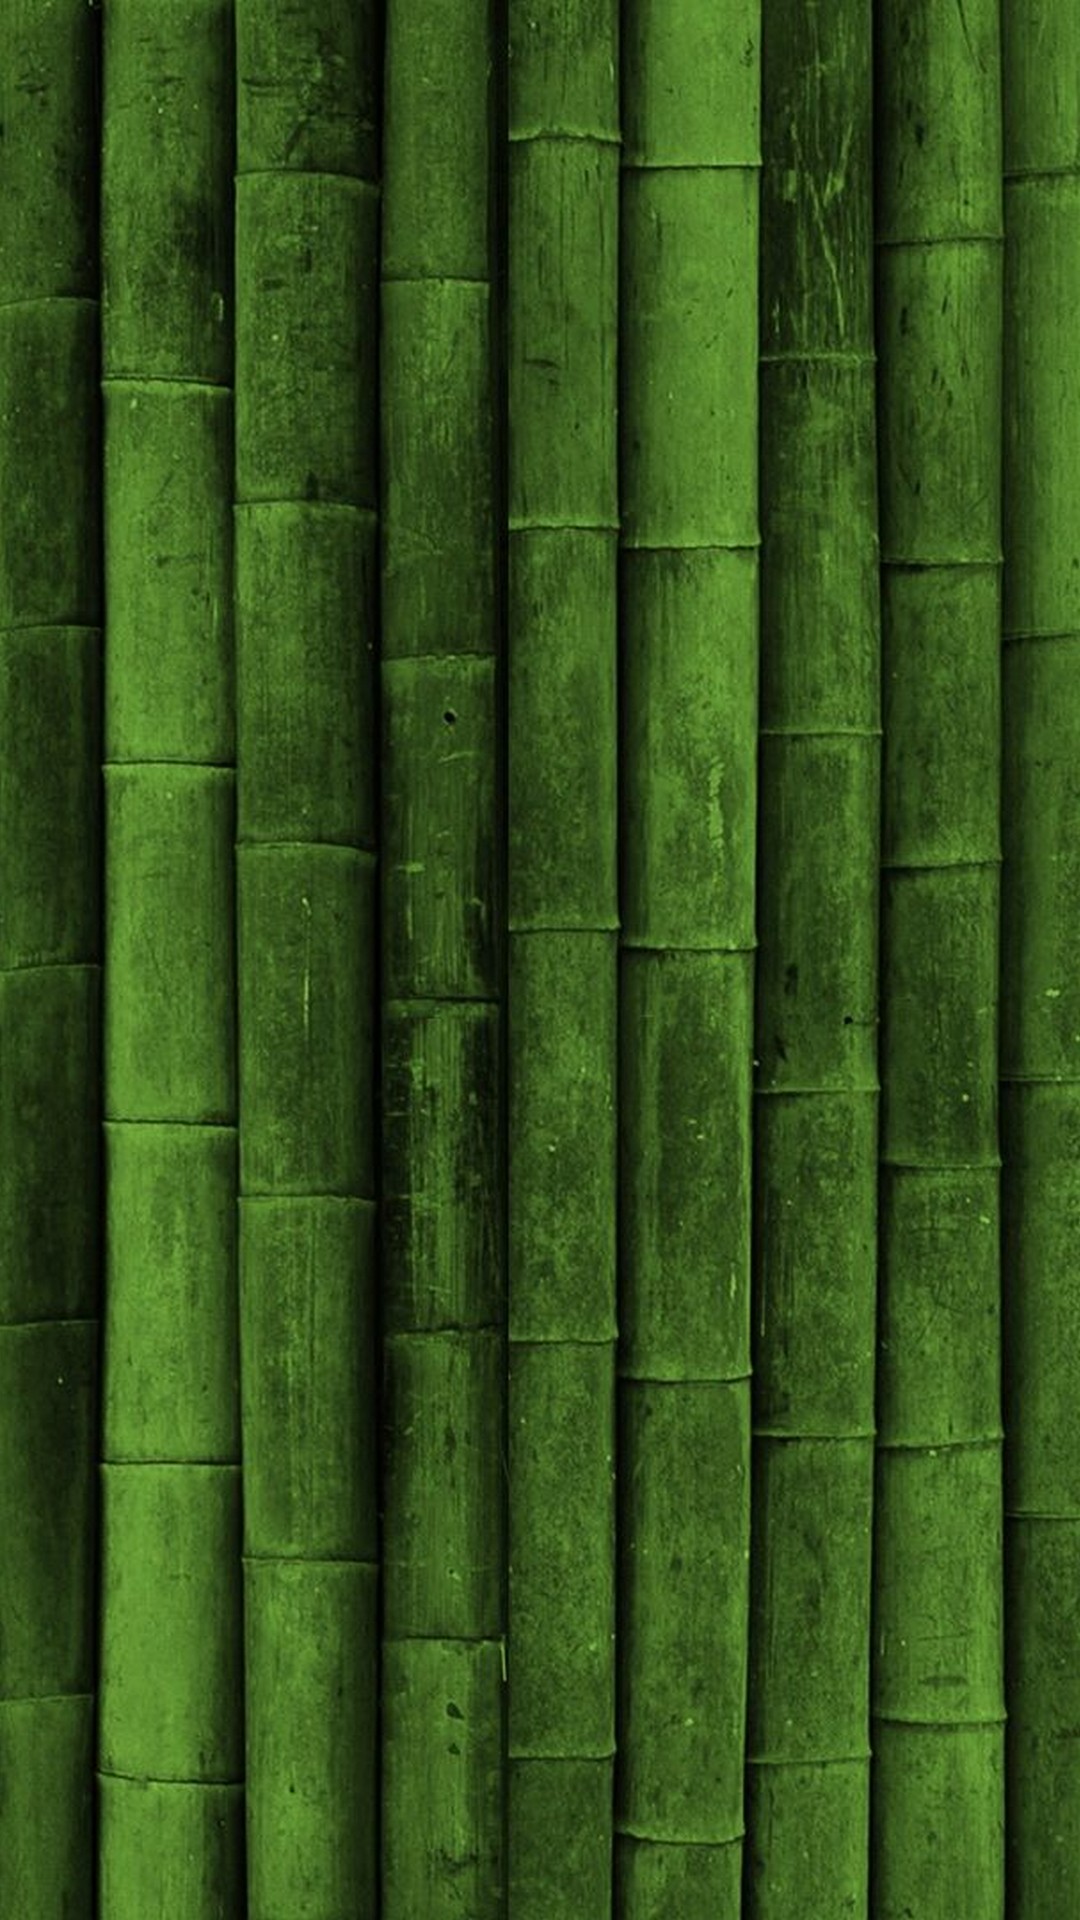 iPhone Wallpaper Dark Green with image resolution 1080x1920 pixel. You can make this wallpaper for your iPhone 5, 6, 7, 8, X backgrounds, Mobile Screensaver, or iPad Lock Screen